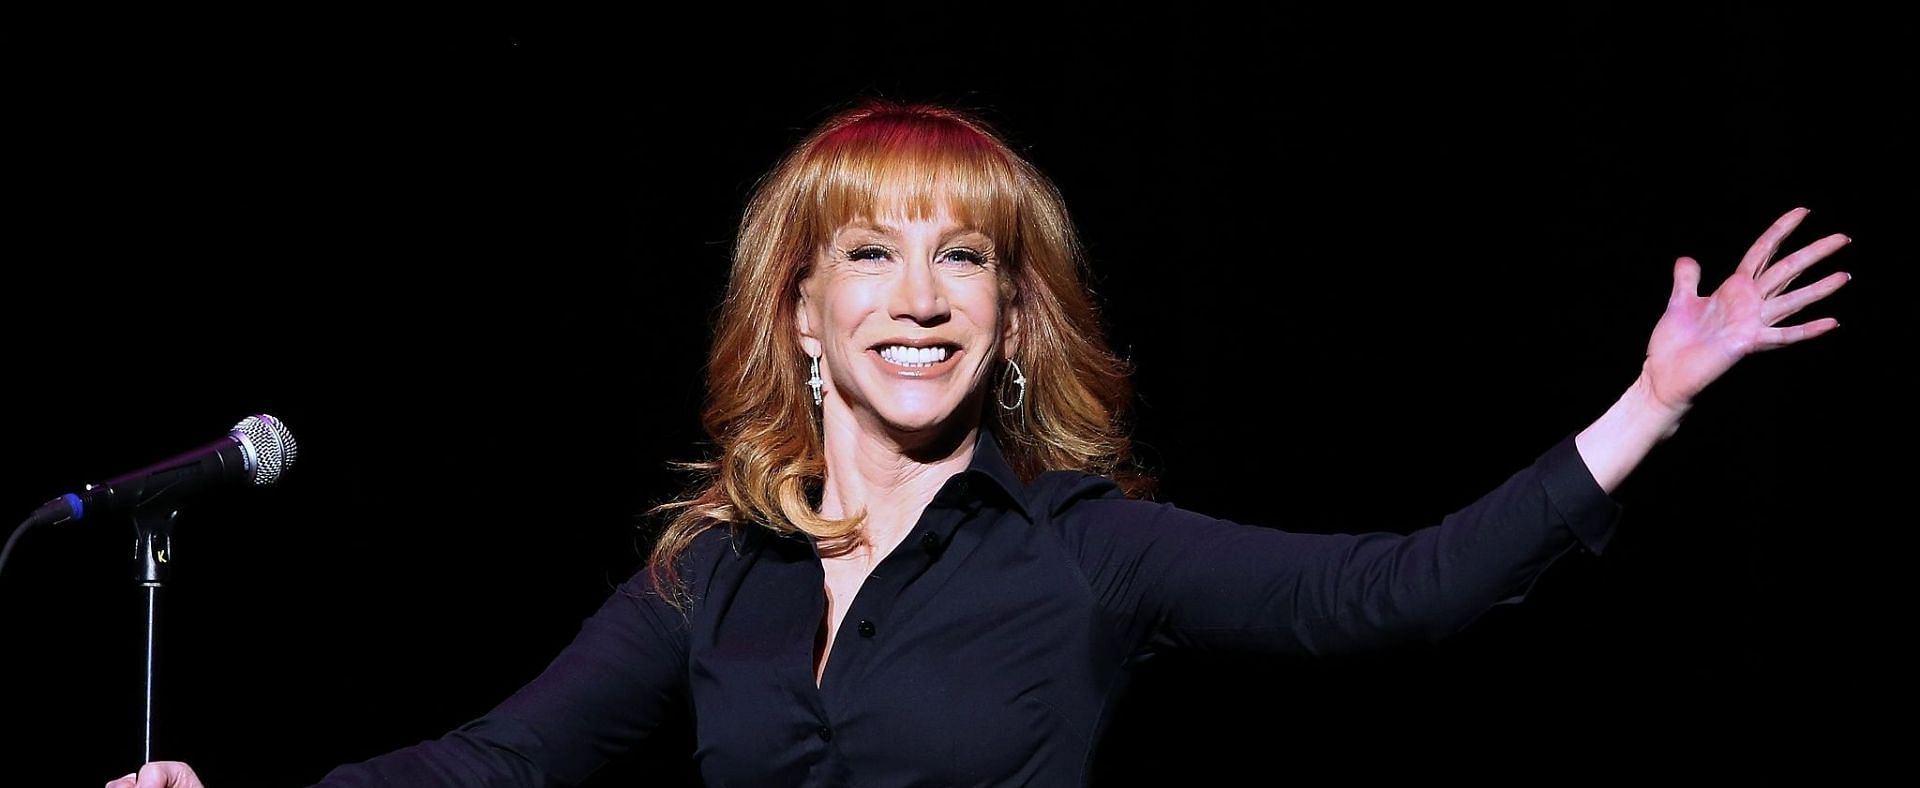 Kathy Griffin recently opened up about her 2017 Trump mask controversy (Image via Jeff Golden/WireImage)